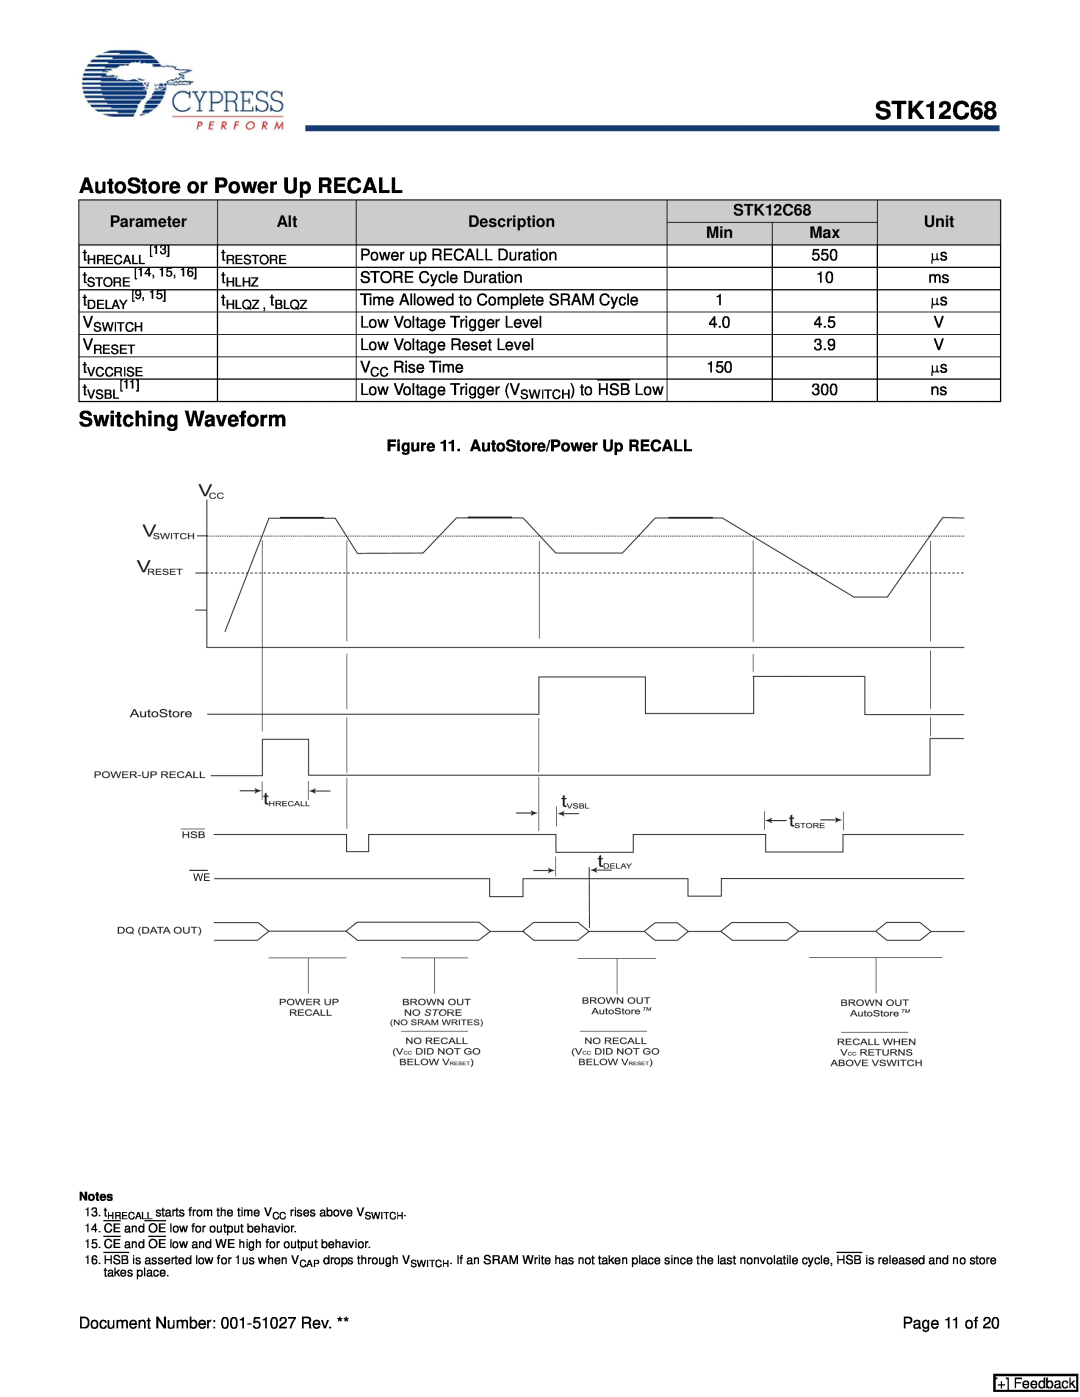 Cypress STK12C68 manual AutoStore or Power Up RECALL, Switching Waveform, Low Voltage Trigger VSWITCH to, Page 11 of 